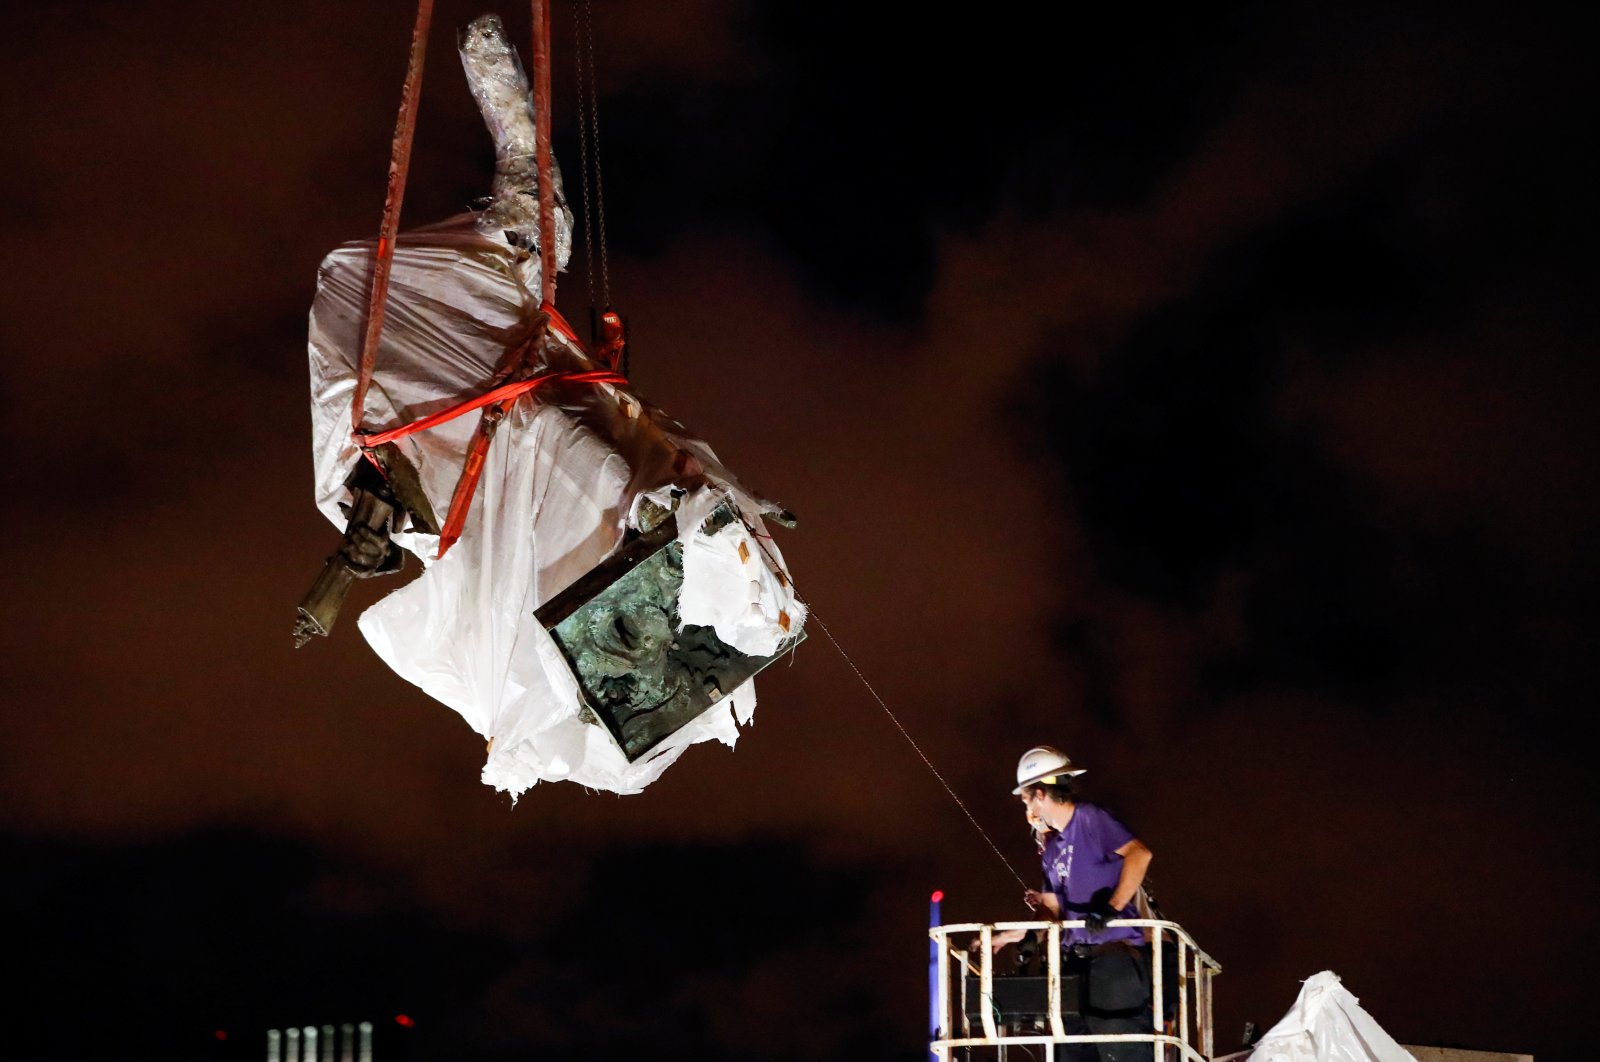 Christopher Columbus statue is being removed from the Grant Park in Chicago, Illinois, US, July 24, 2020. (Reuters Photo)